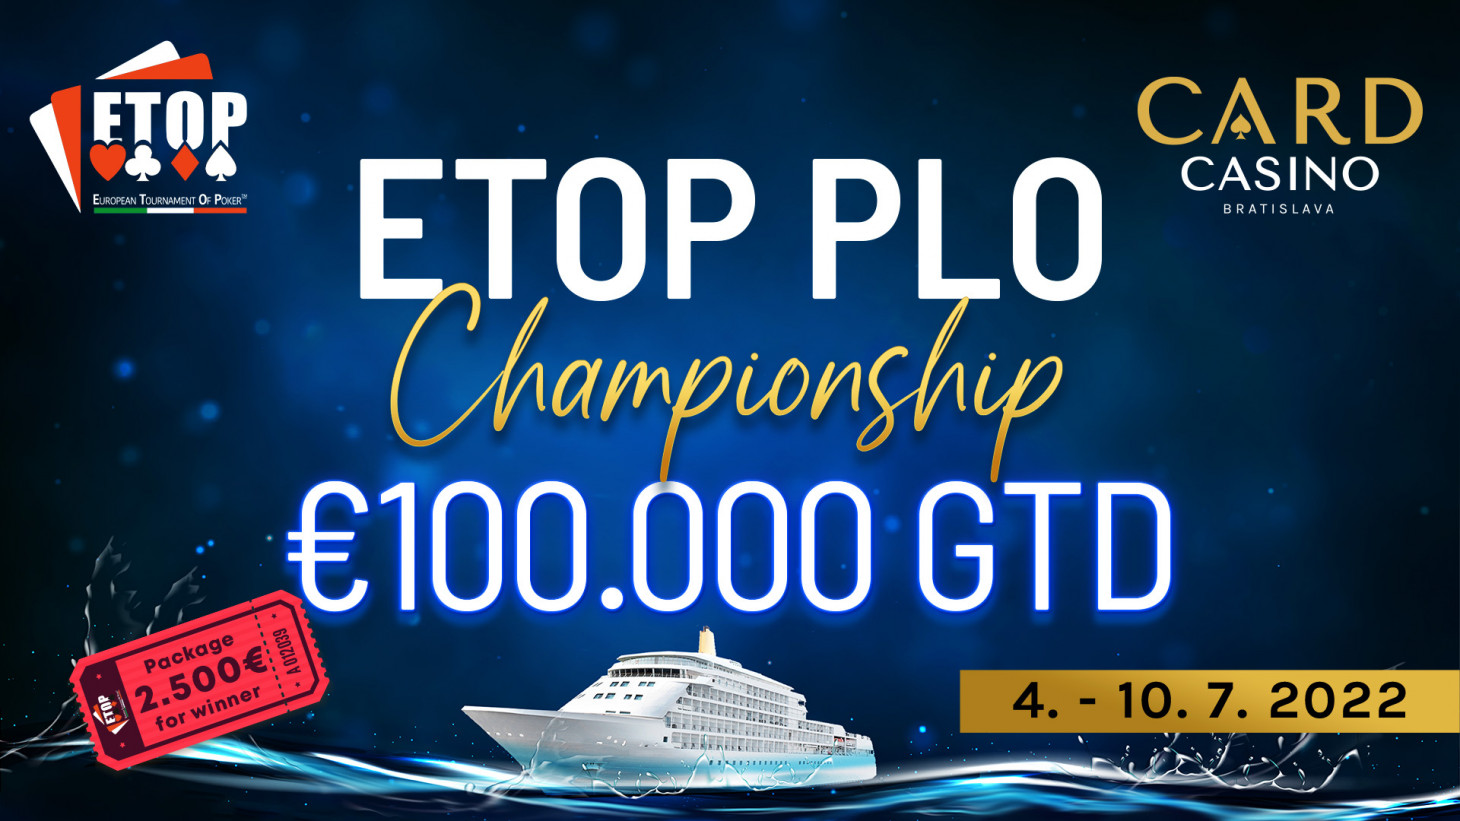 ETOP returns to Bratislava with a double guarantee of 100.000€!